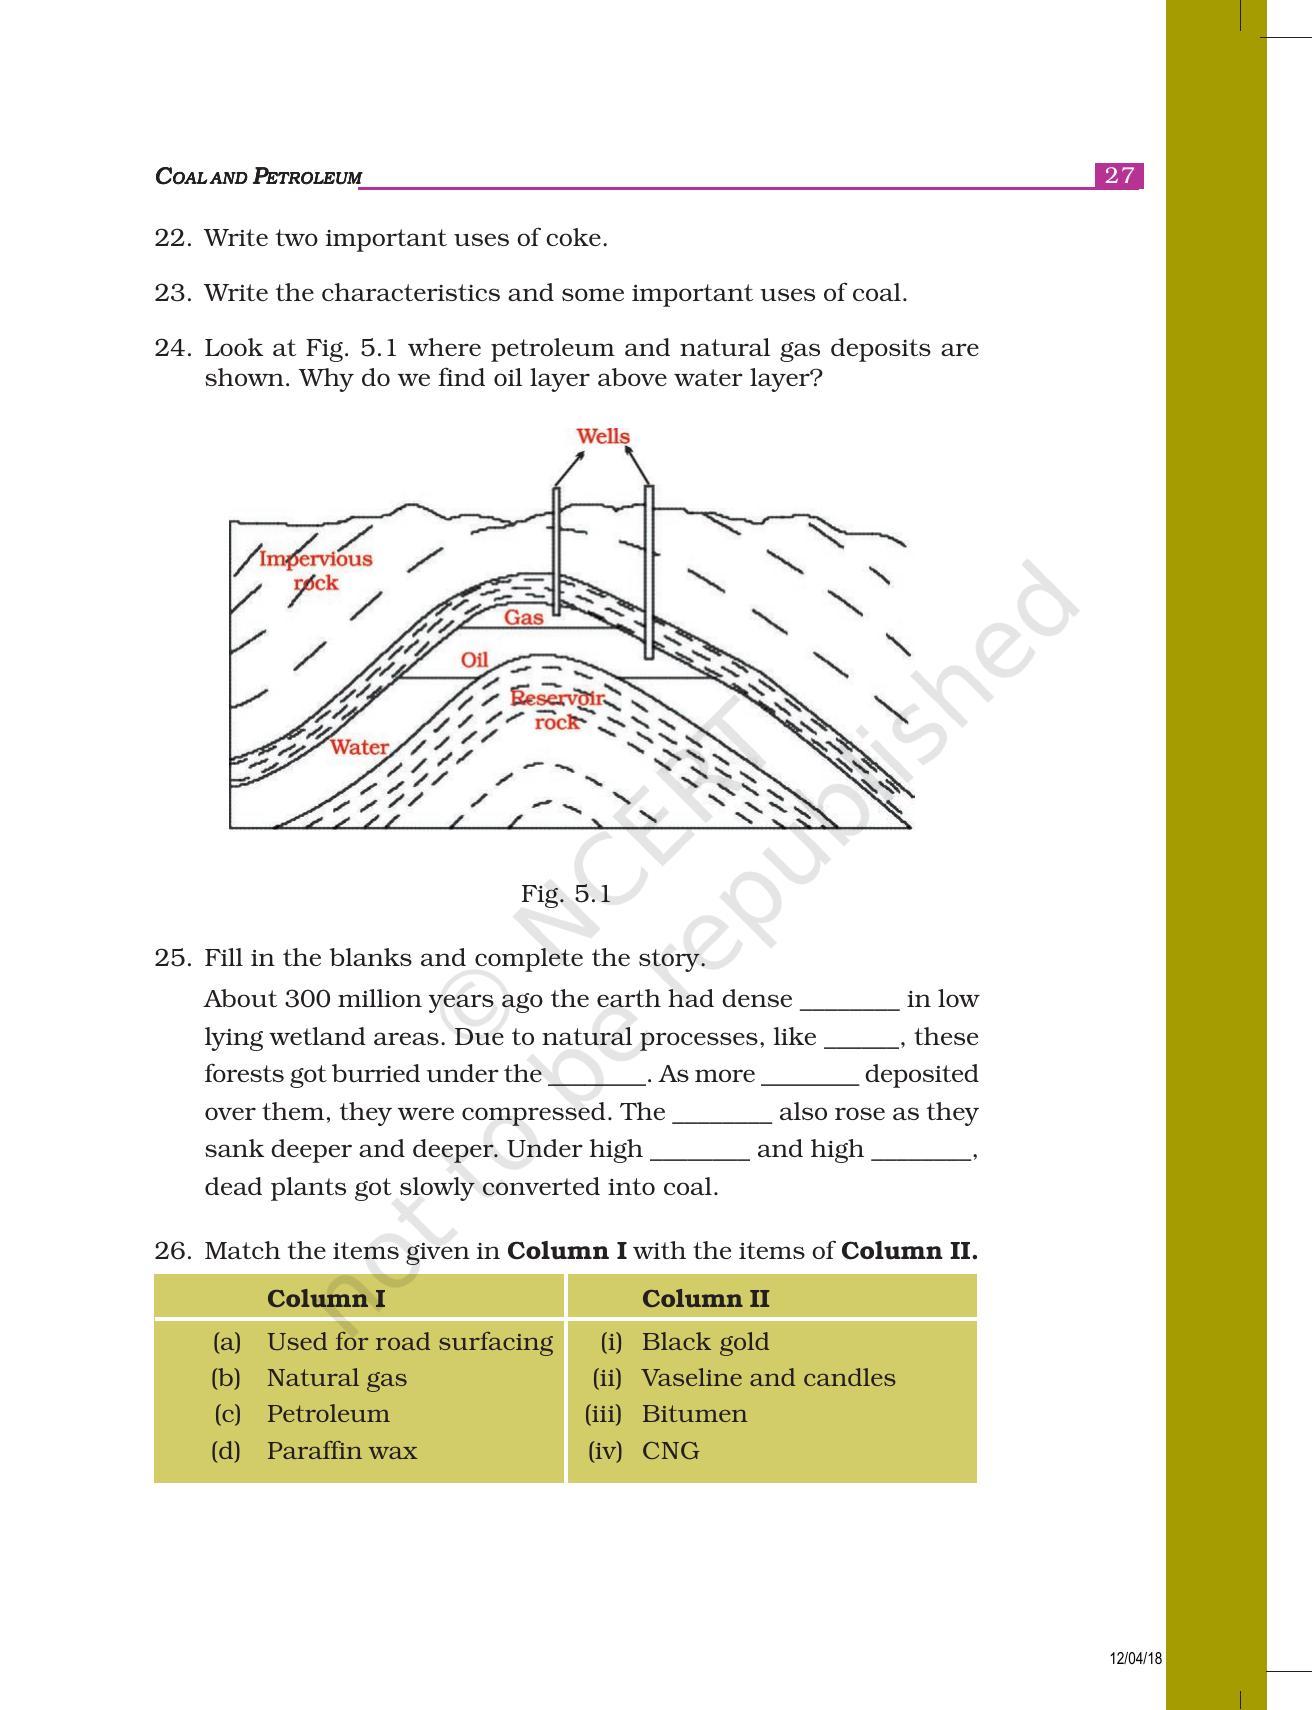 NCERT Exemplar Book for Class 8 Science: Chapter 5- Coal and Petroleum - Page 4